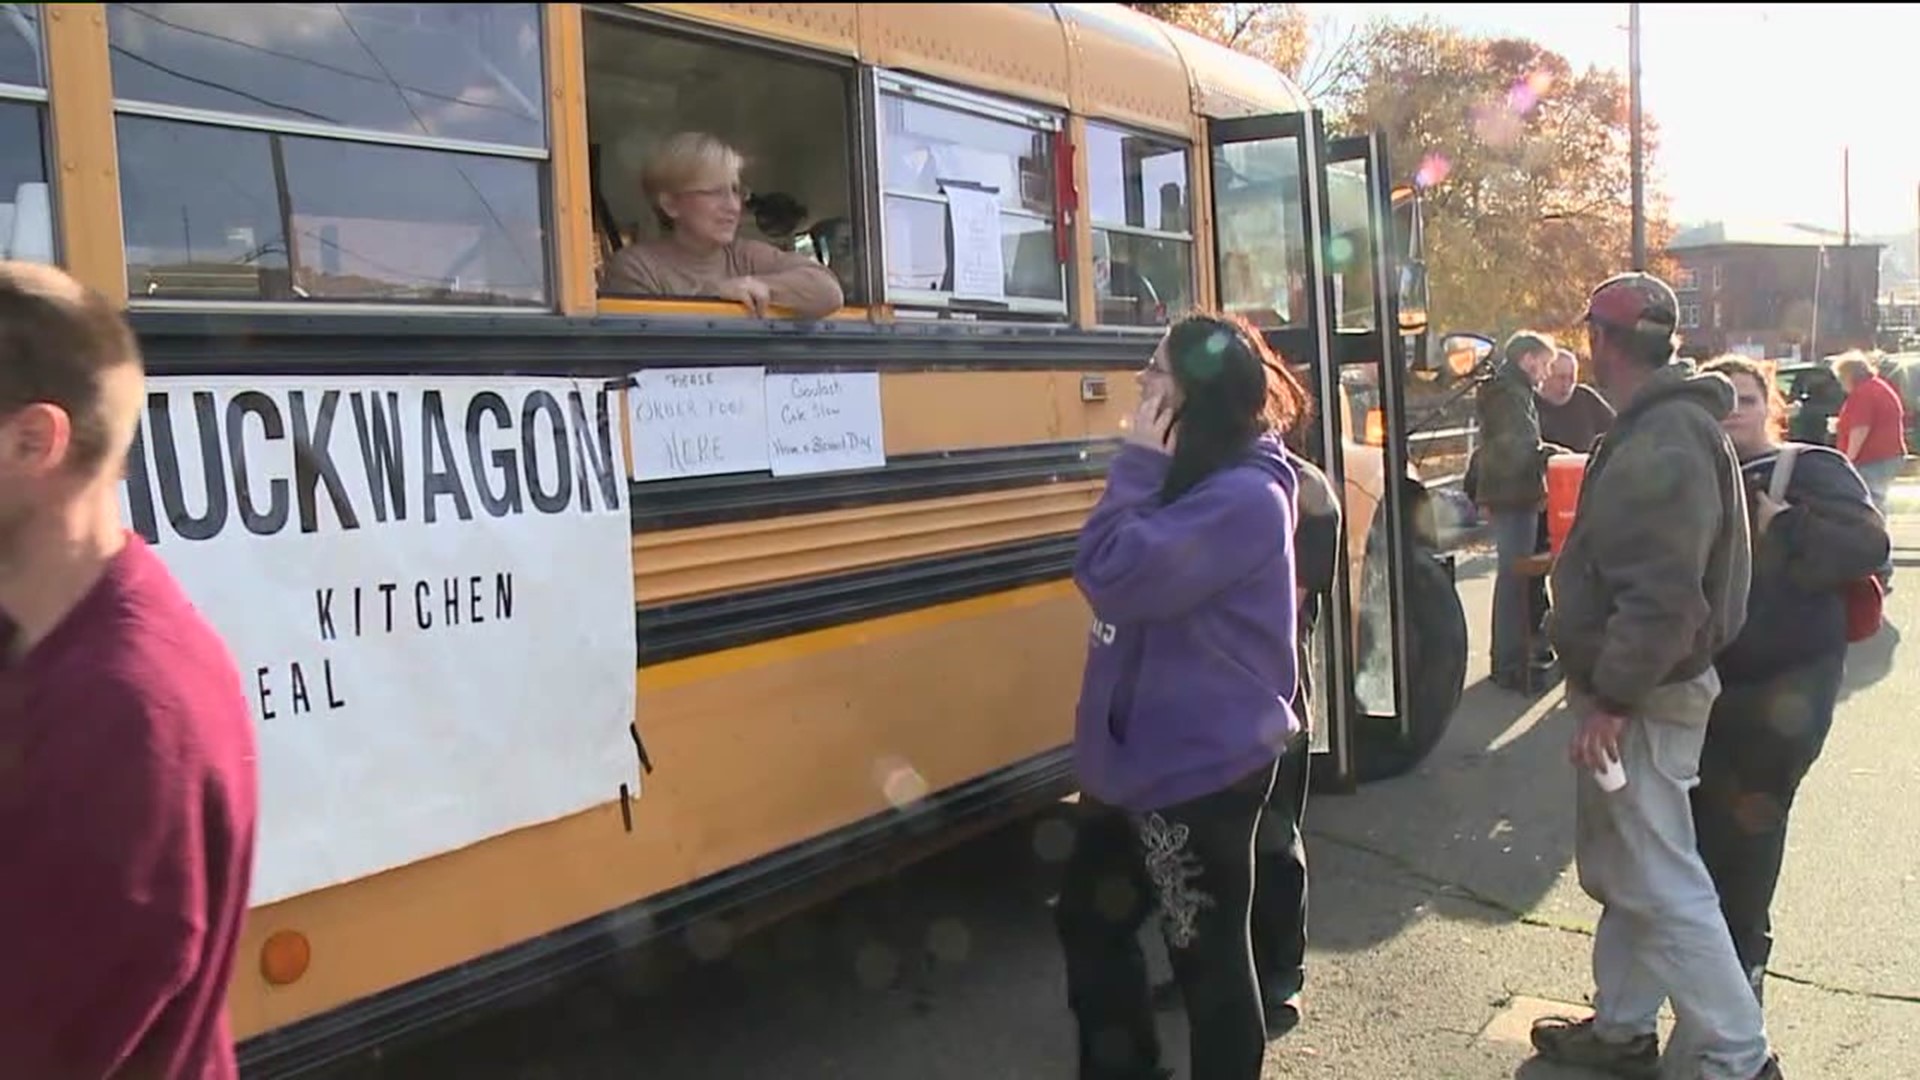 A mobile food kitchen in the Shamokin area has not been able to operate because its bus broke down, but community members recently raised enough money to fix it.